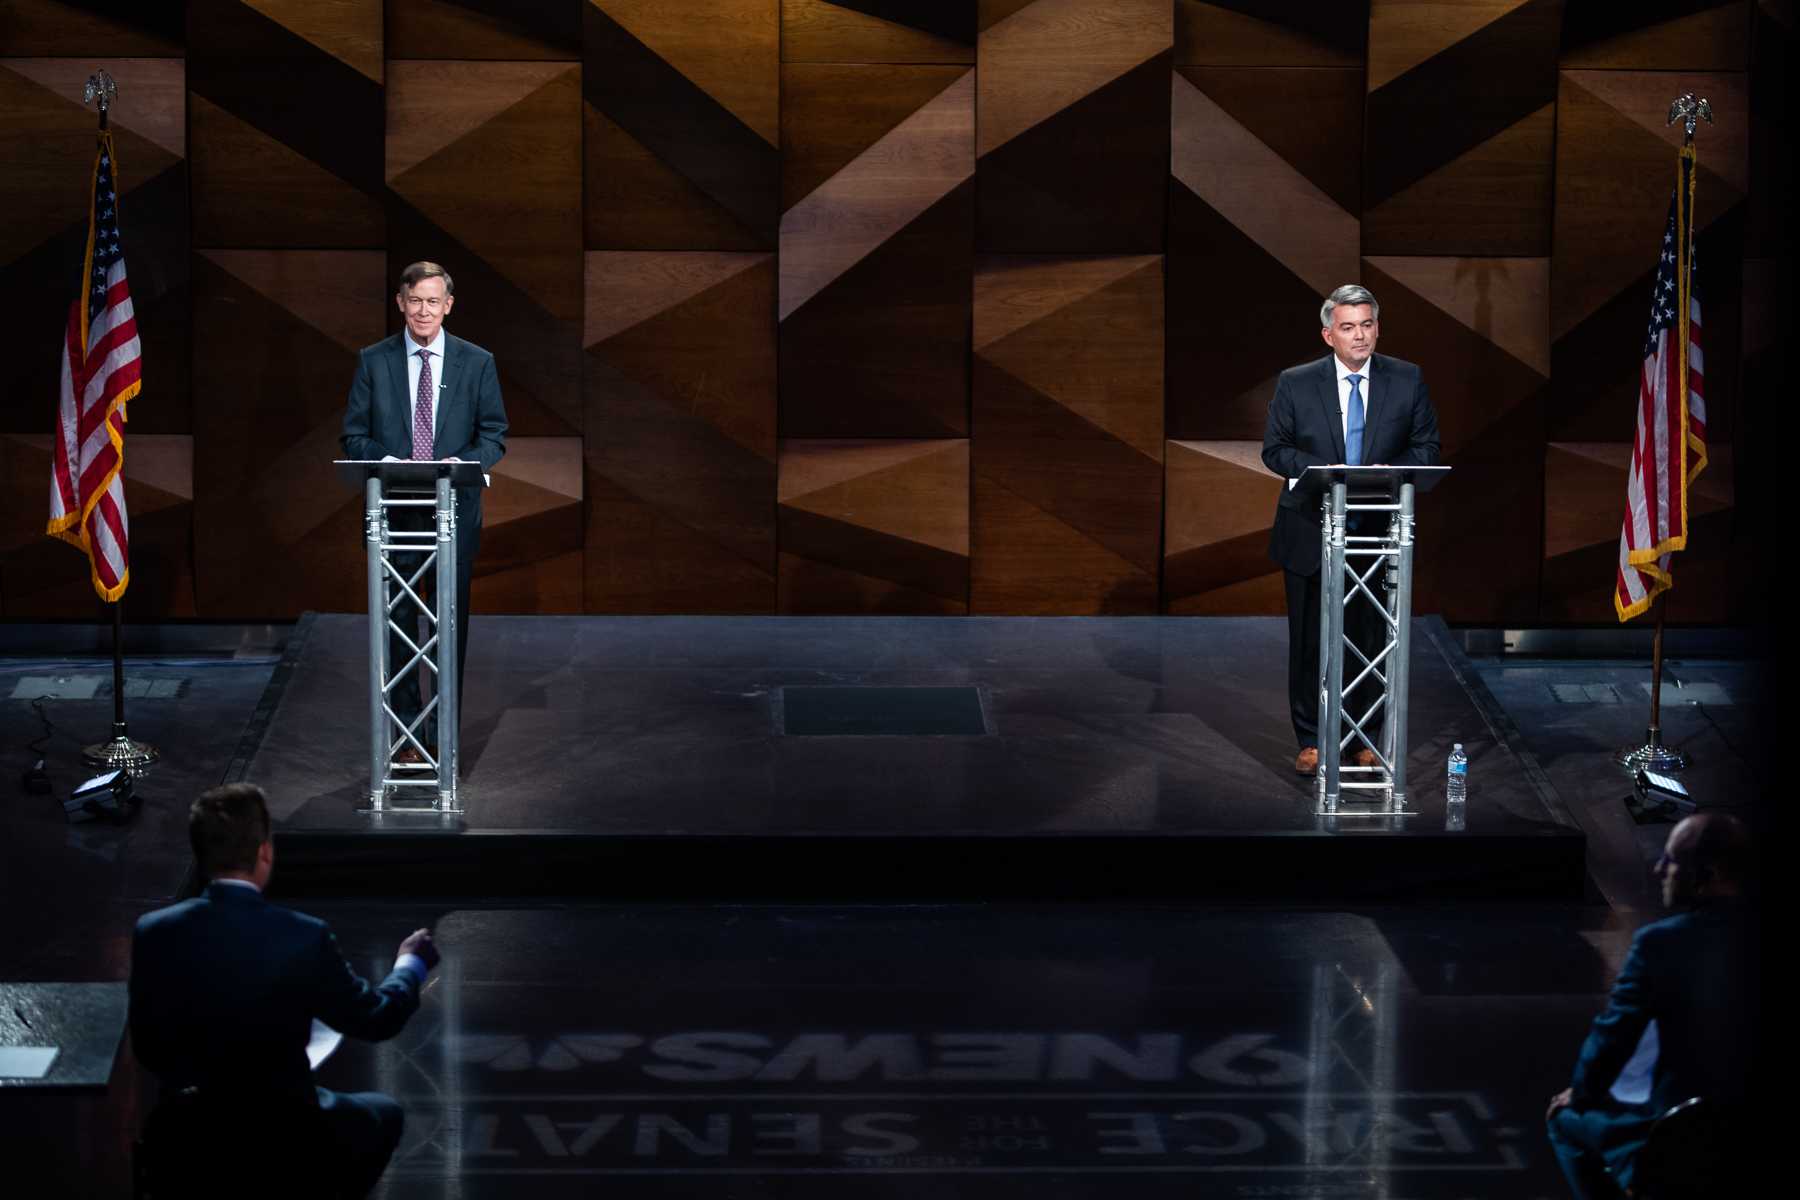 John Hickenlooper and Cory Gardner on the LSC Theatre stage for their final debate